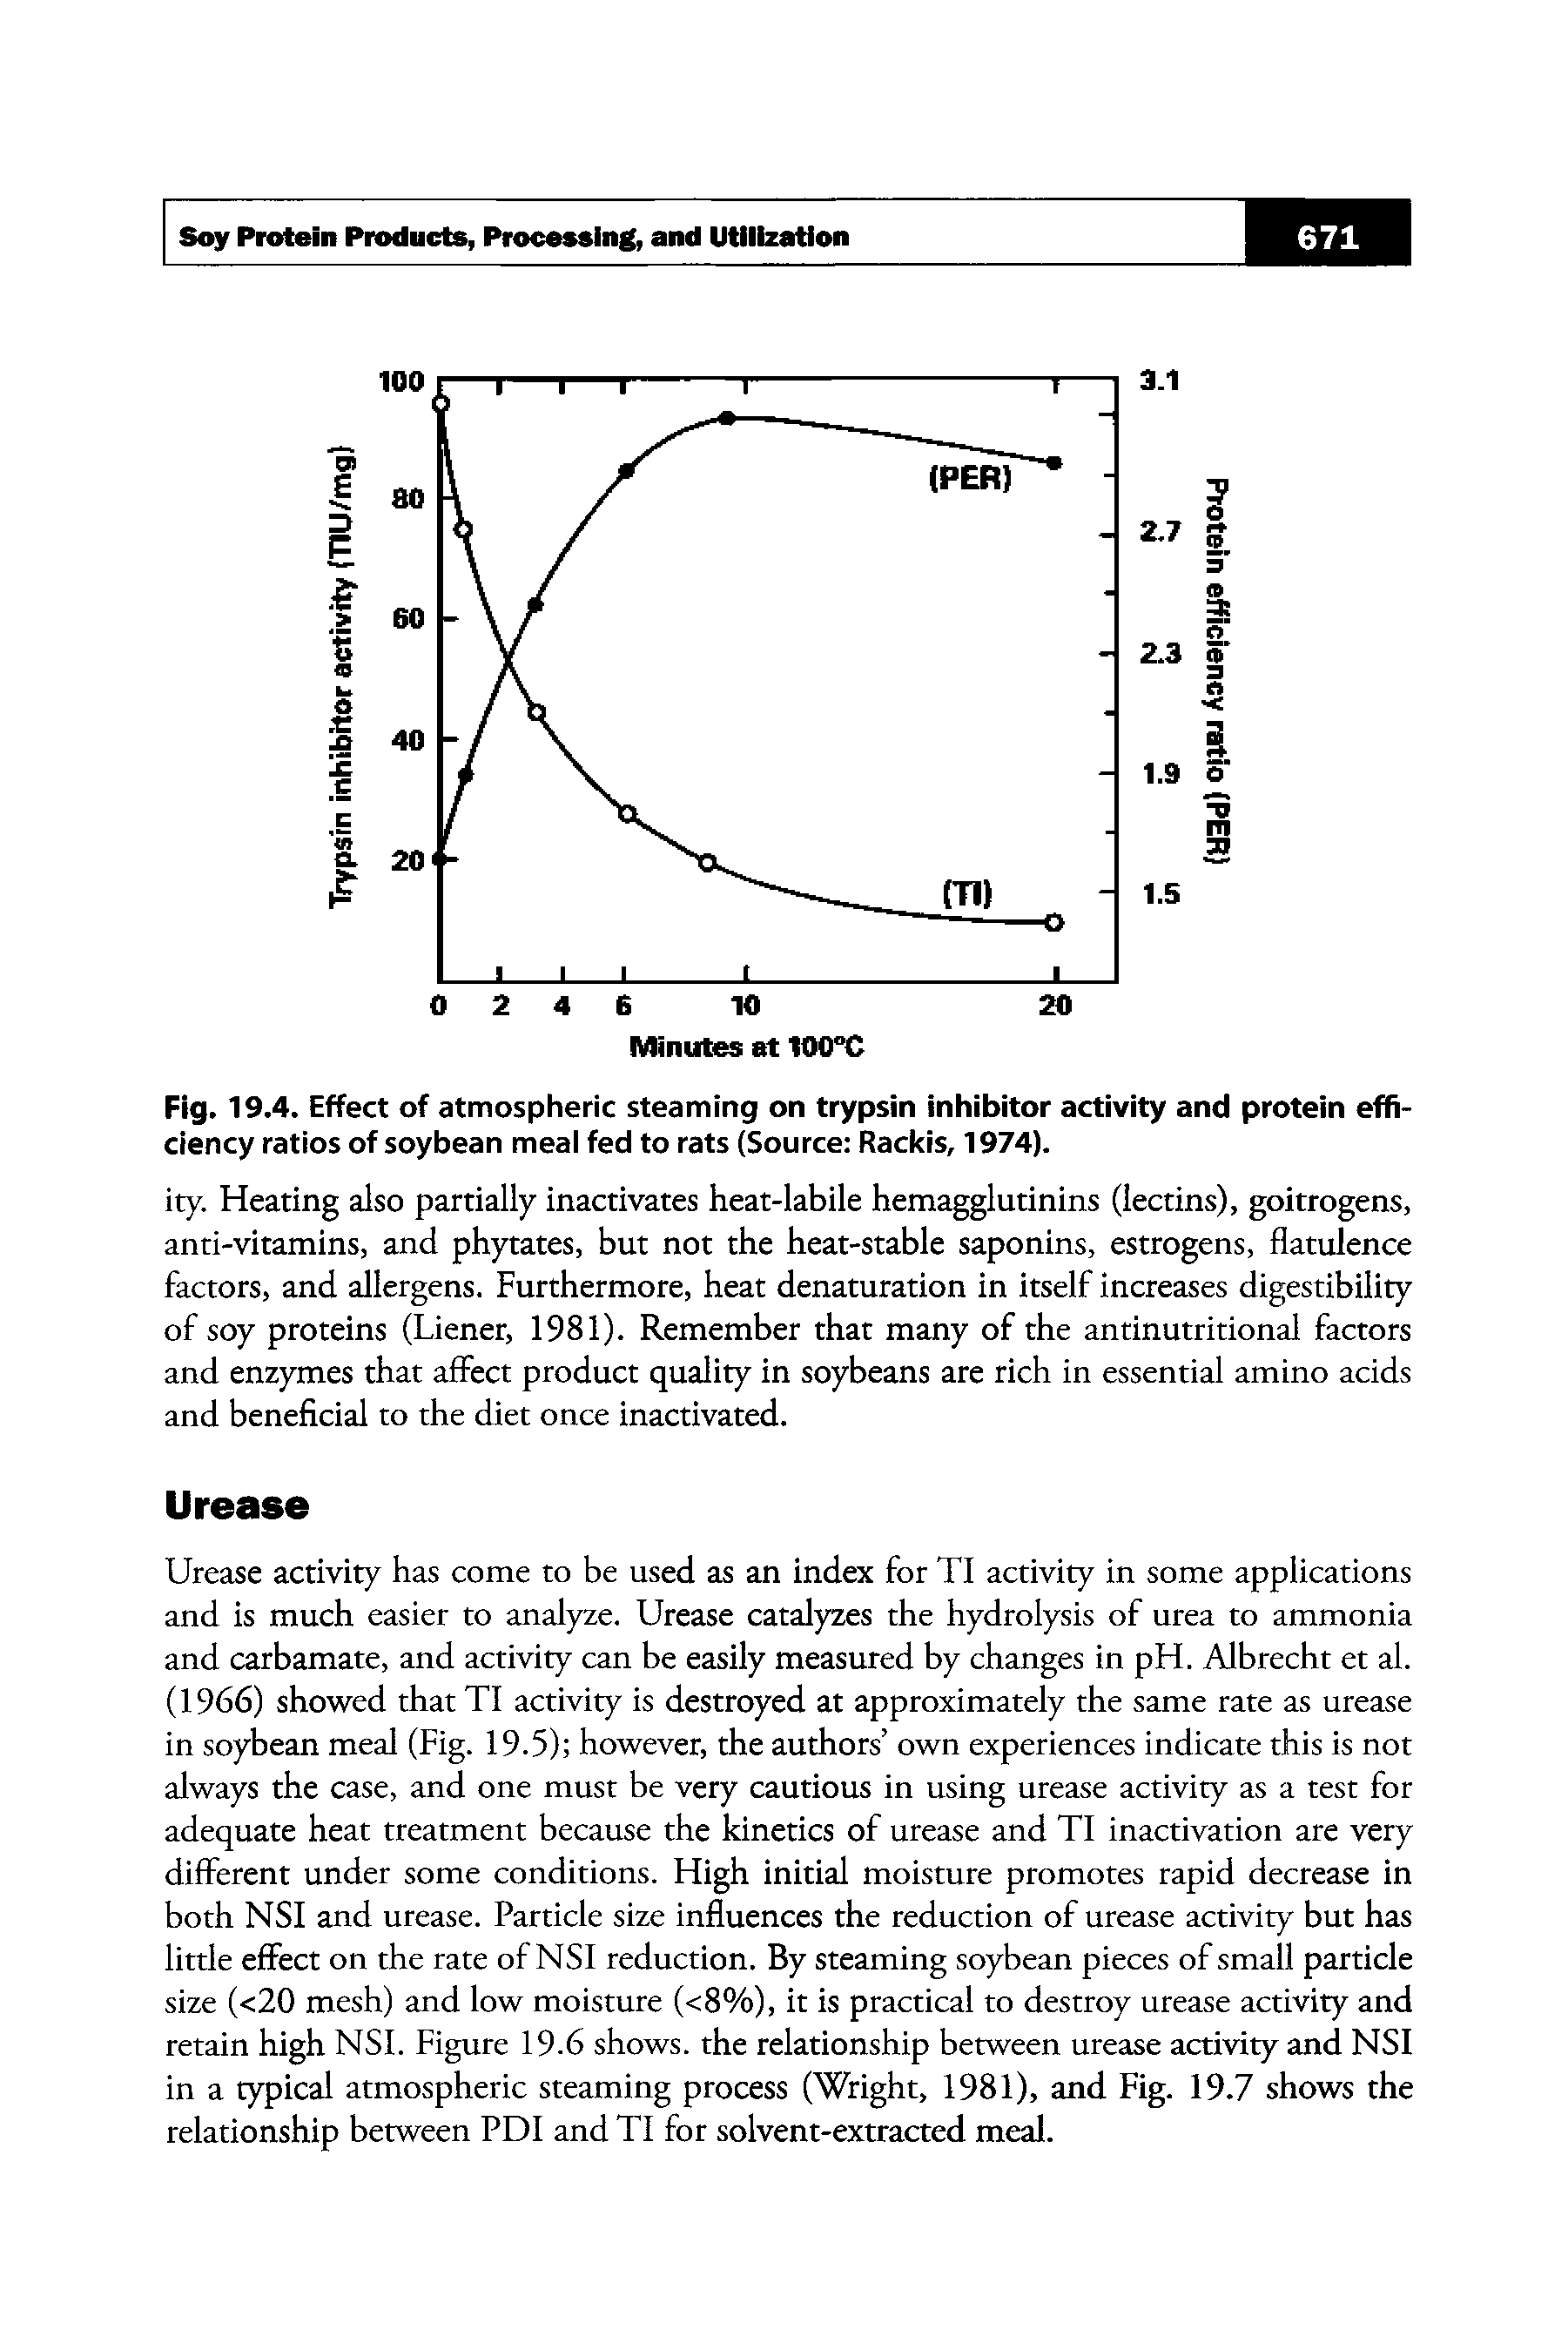 Fig. 19.4. Effect of atmospheric steaming on trypsin inhibitor activity and protein efficiency ratios of soybean meal fed to rats (Source Rackis, 1974).